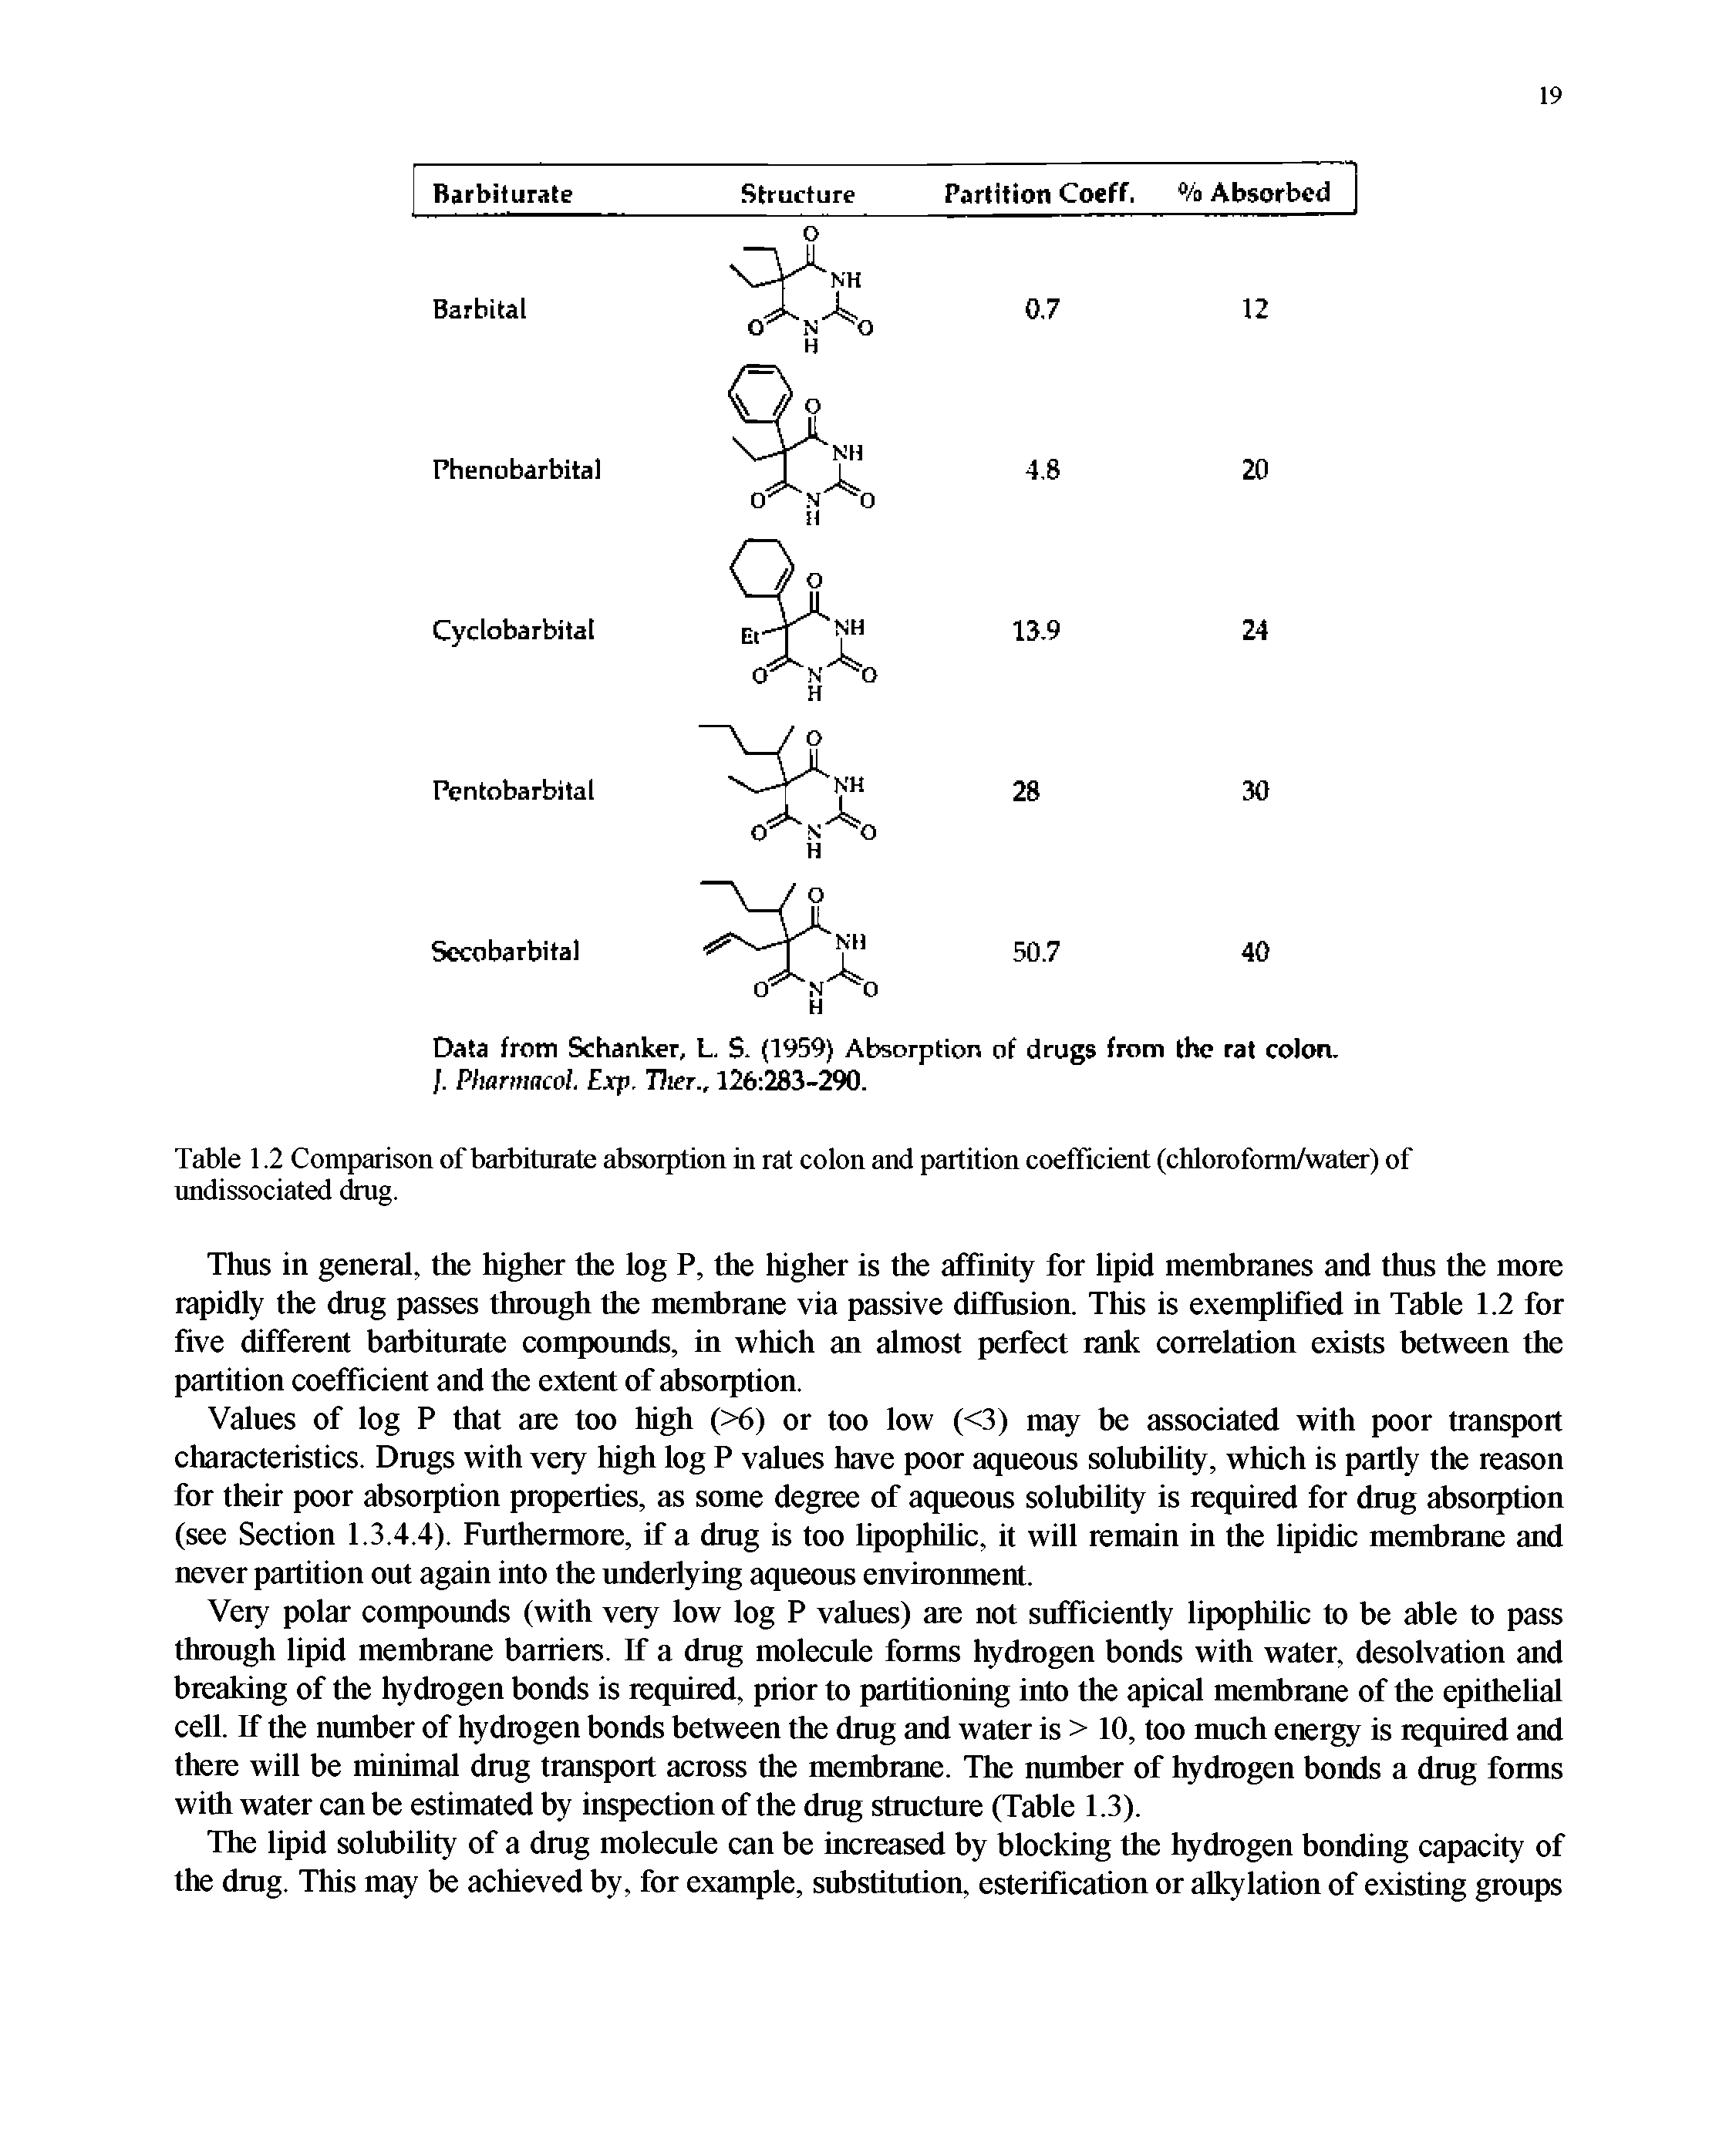 Table 1.2 Comparison of barbiturate absorption in rat colon and partition coefficient (chloroform/water) of undissociated drug.